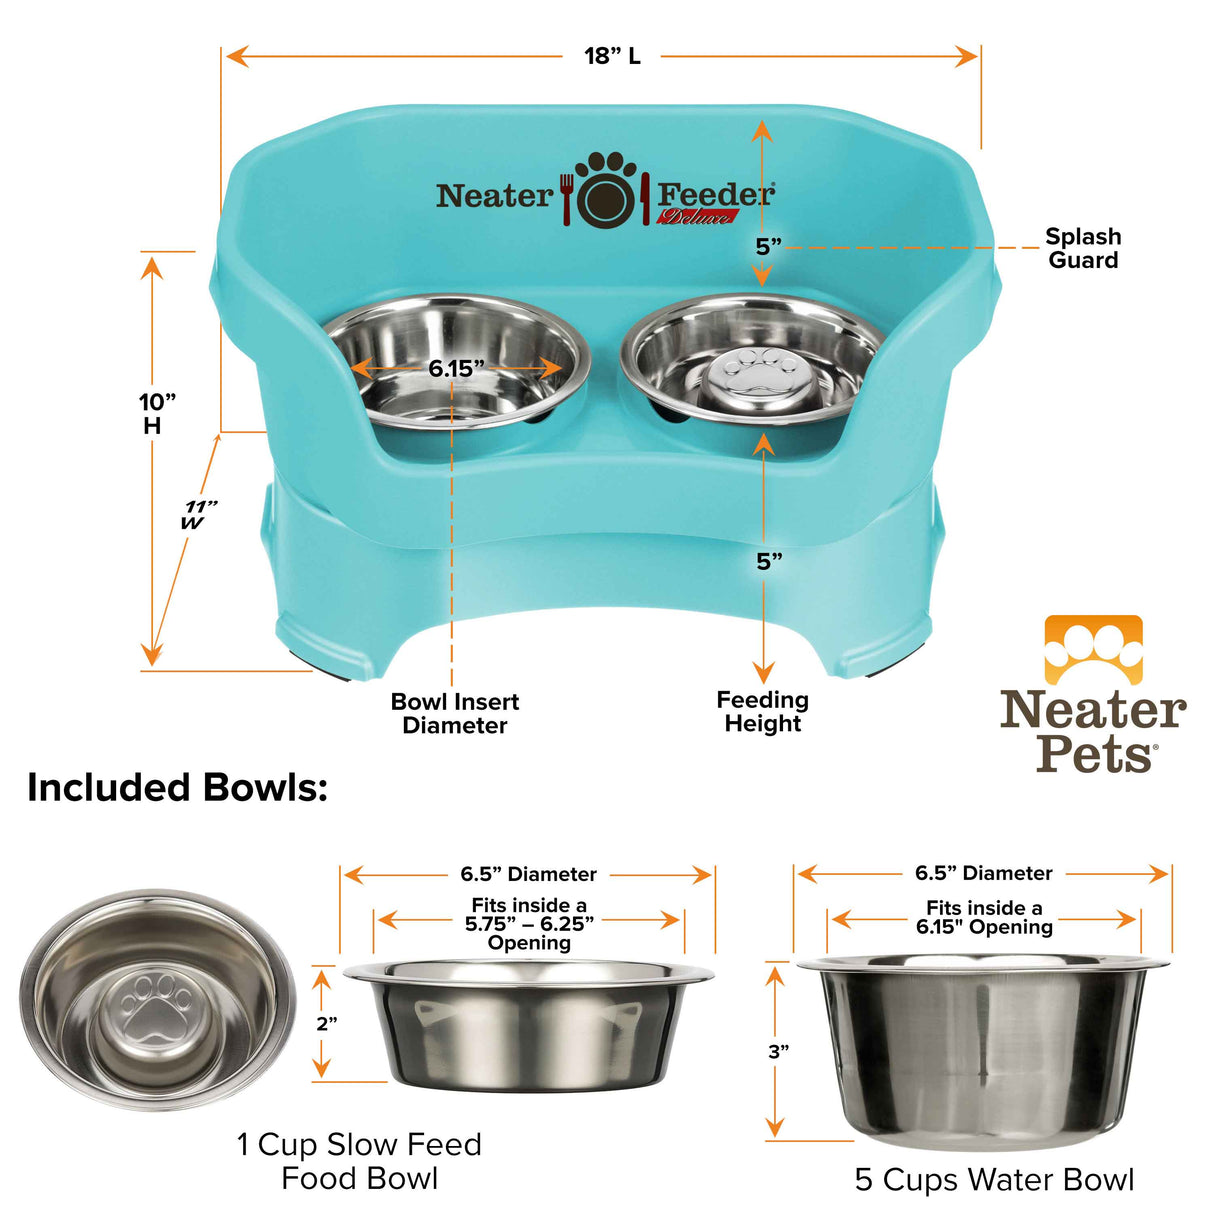 Aquamarine medium DELUXE Neater Feeder with Stainless Steel Slow Feed Bowl dimensions